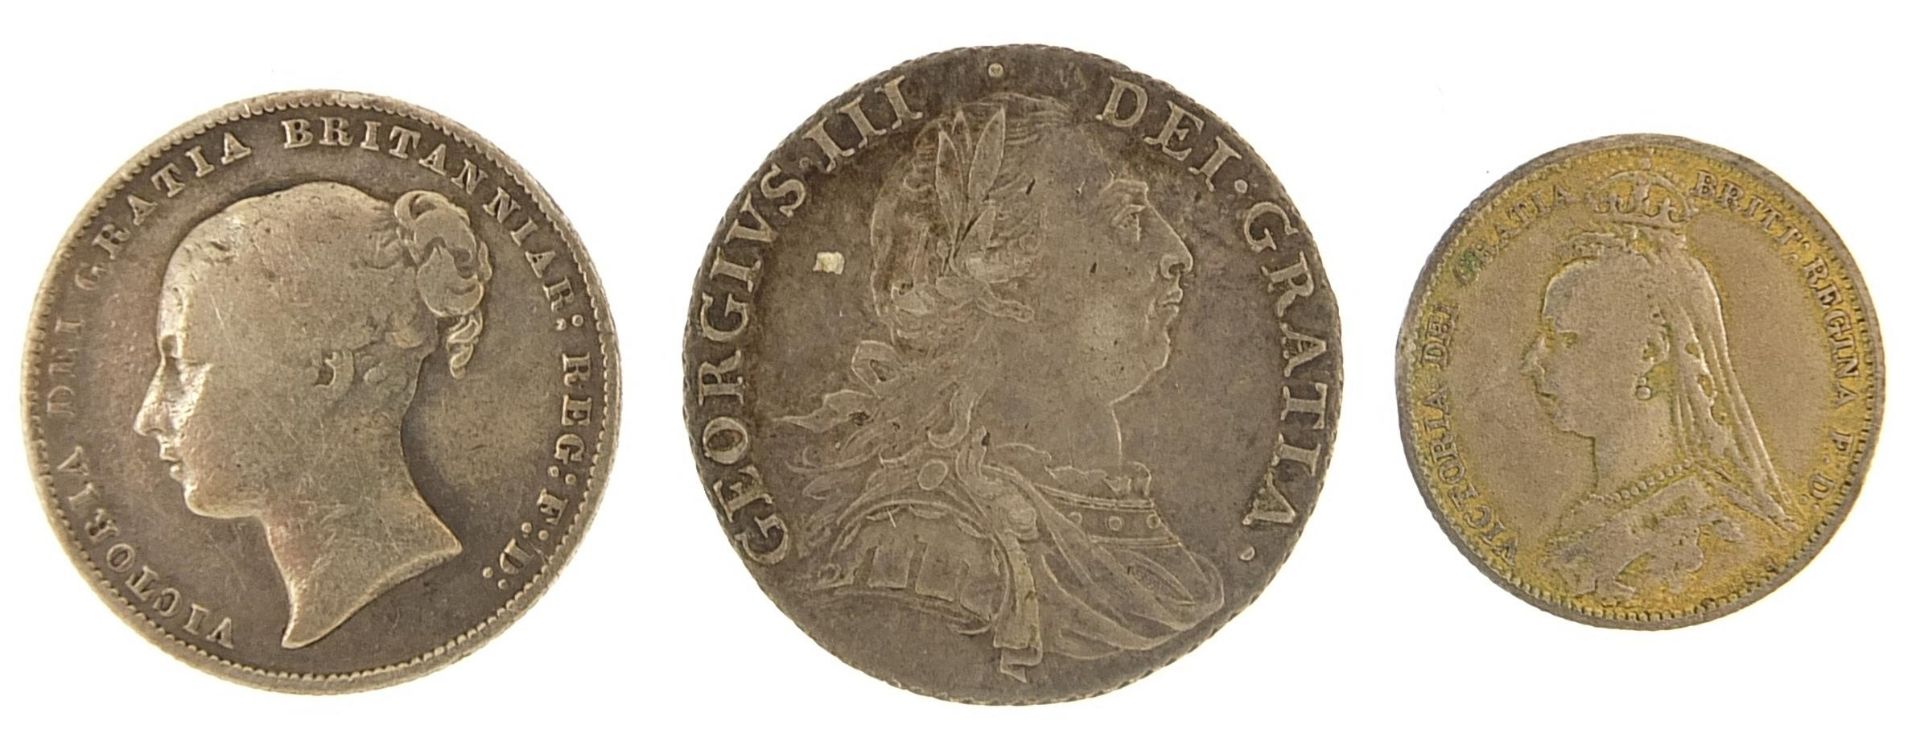 George III and later silver coinage comprising 1787 and 1867 shillings and an 1887 enamelled - Image 2 of 2